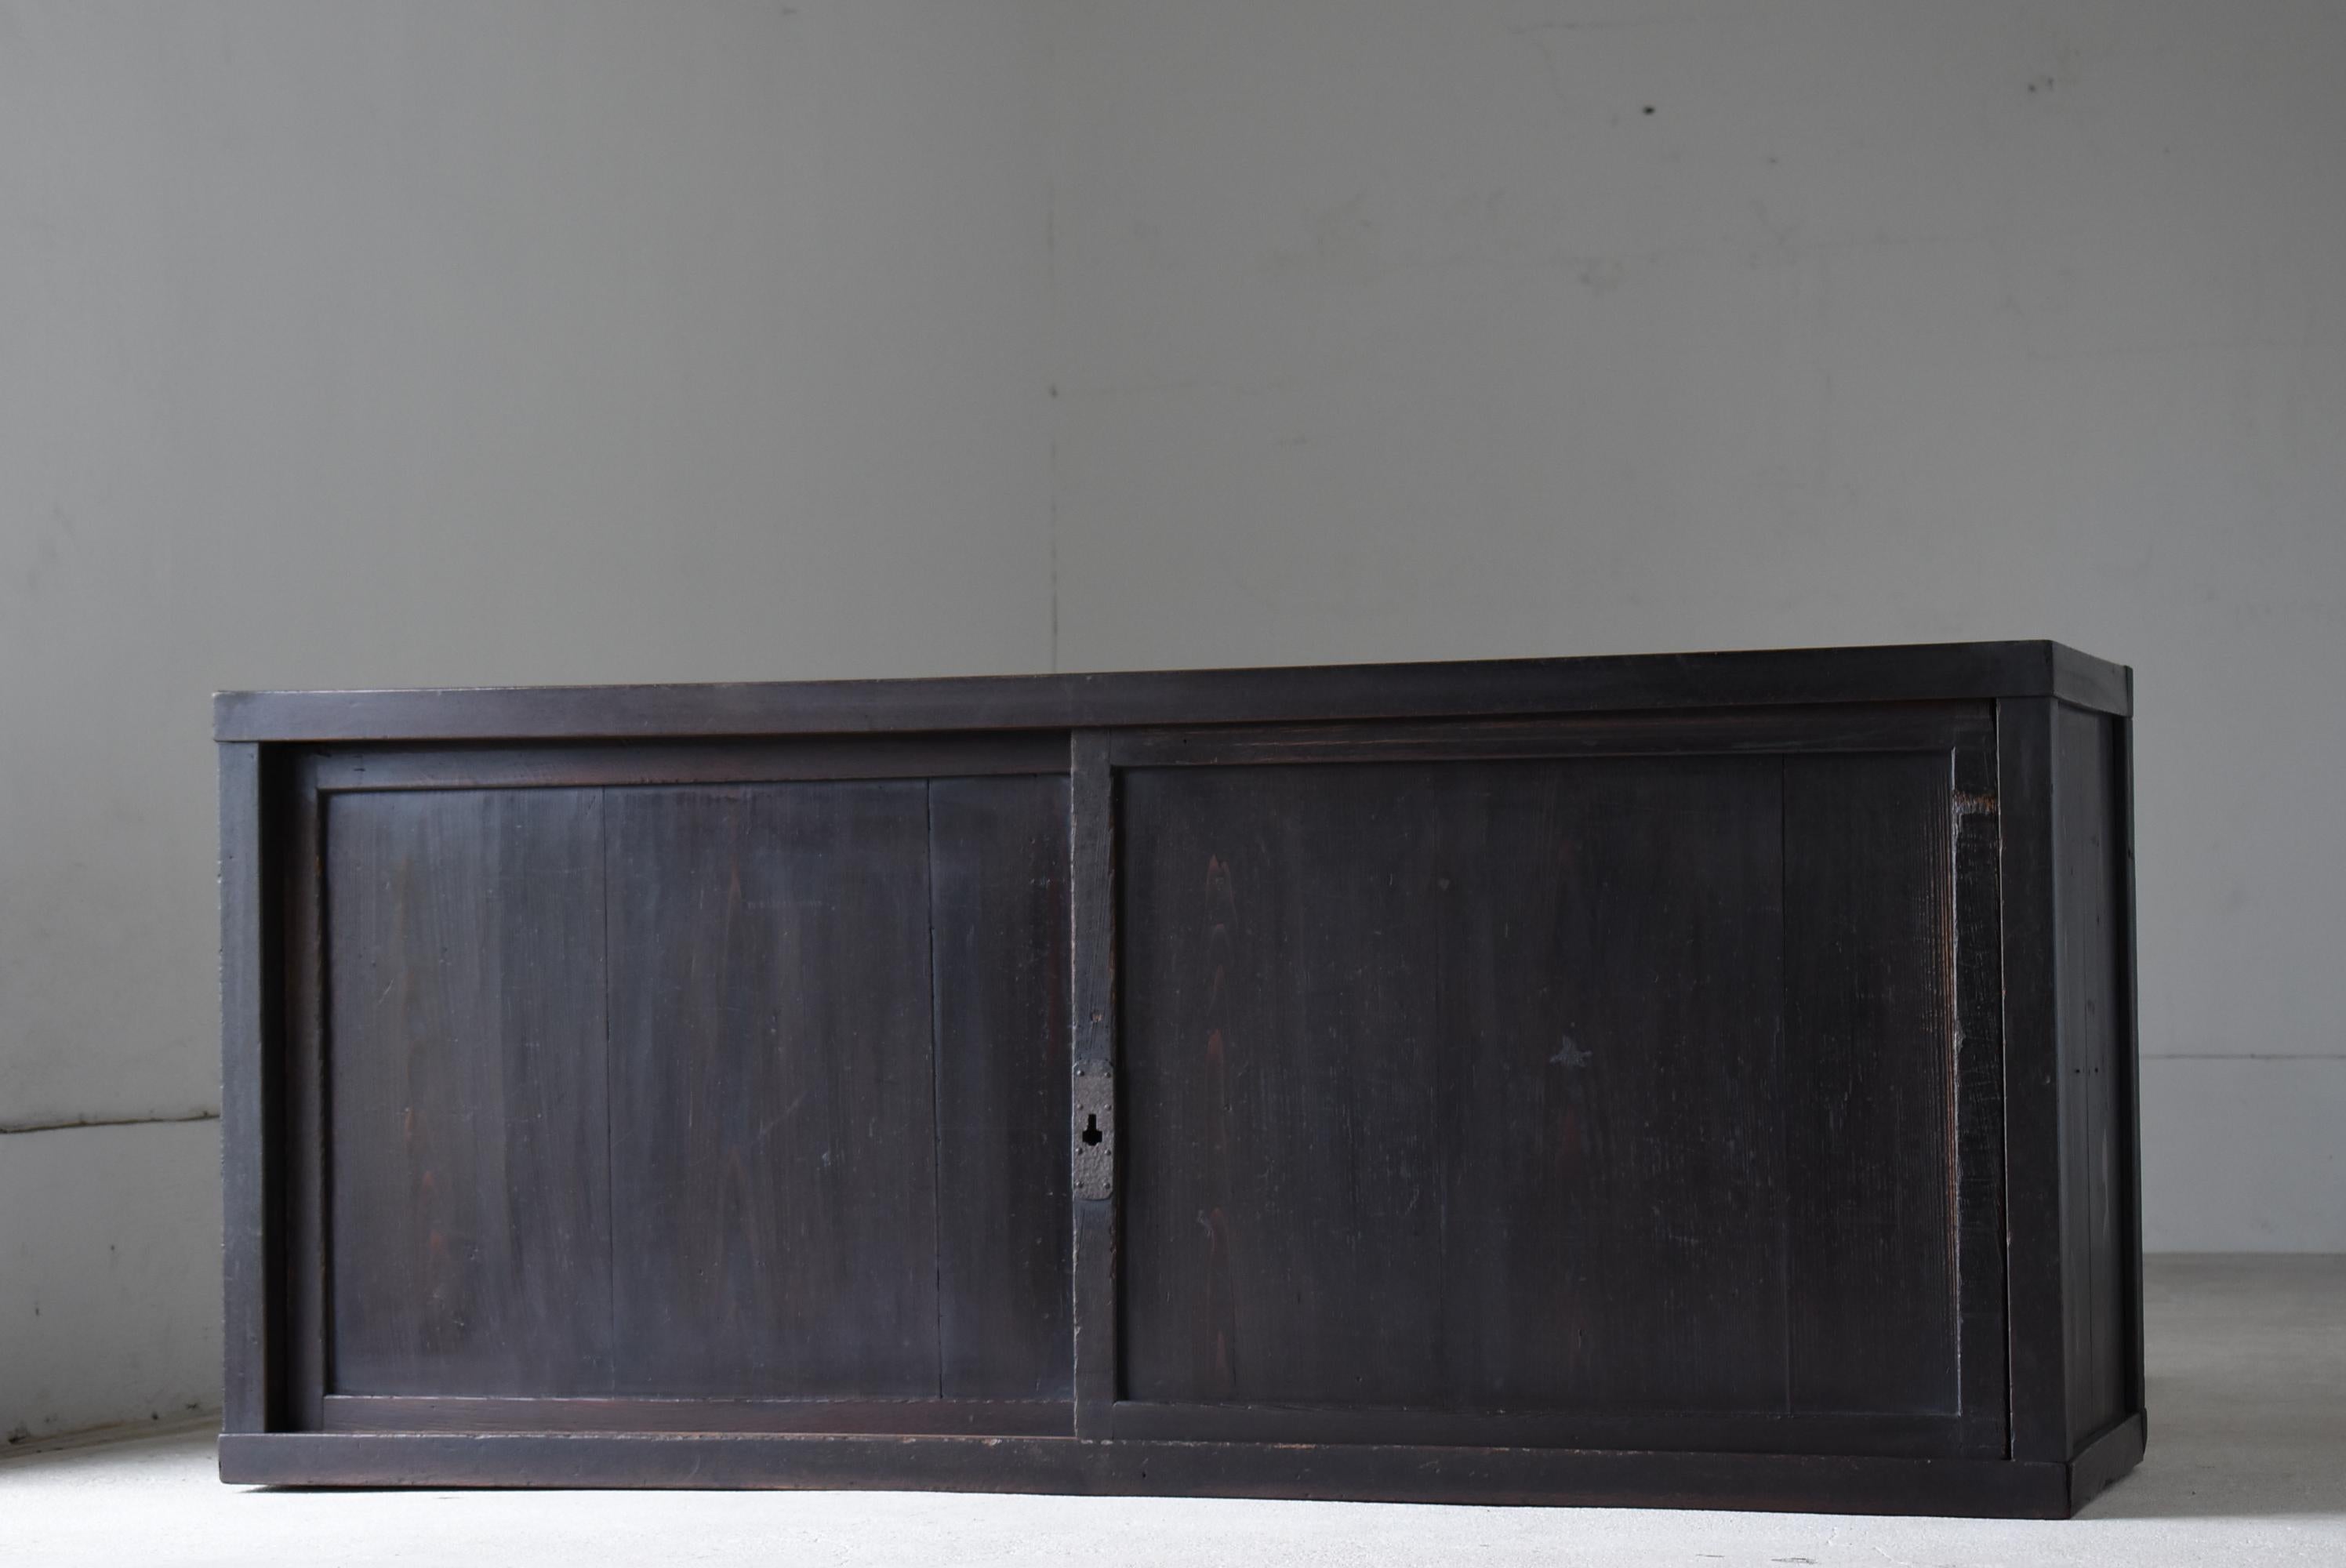 This is a very old large Japanese Black Tansu.
It is from the Meiji period (1860s-1900s).
It is made of cedar wood.

It has a simple and beautiful design with no unnecessary decoration.
It is the ultimate in simplicity.

The doors move